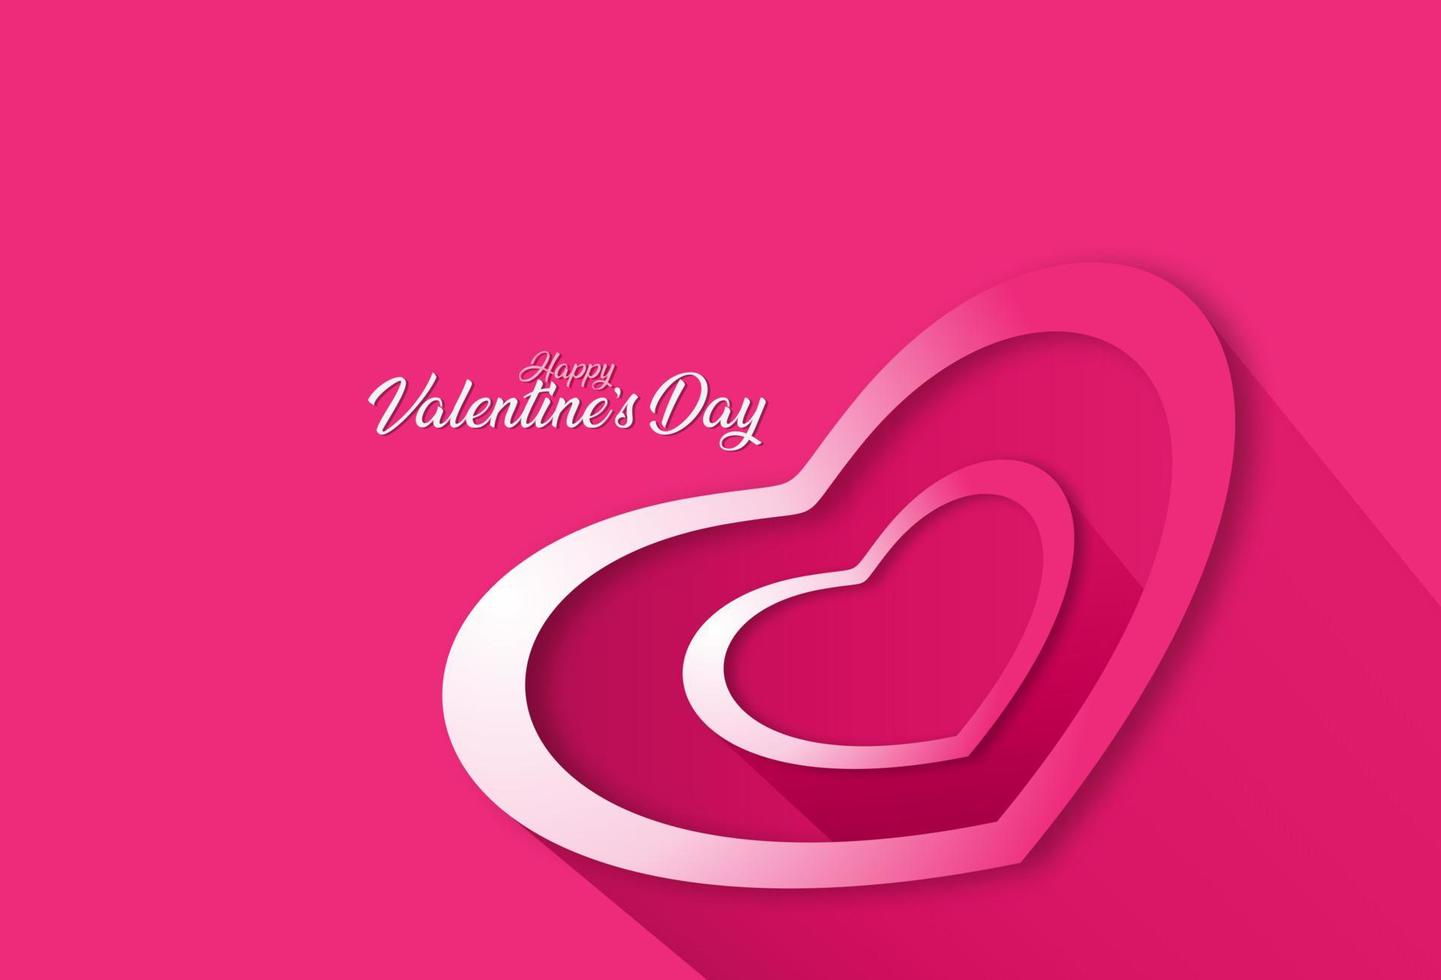 Valentine's day background with pink heart shape vector